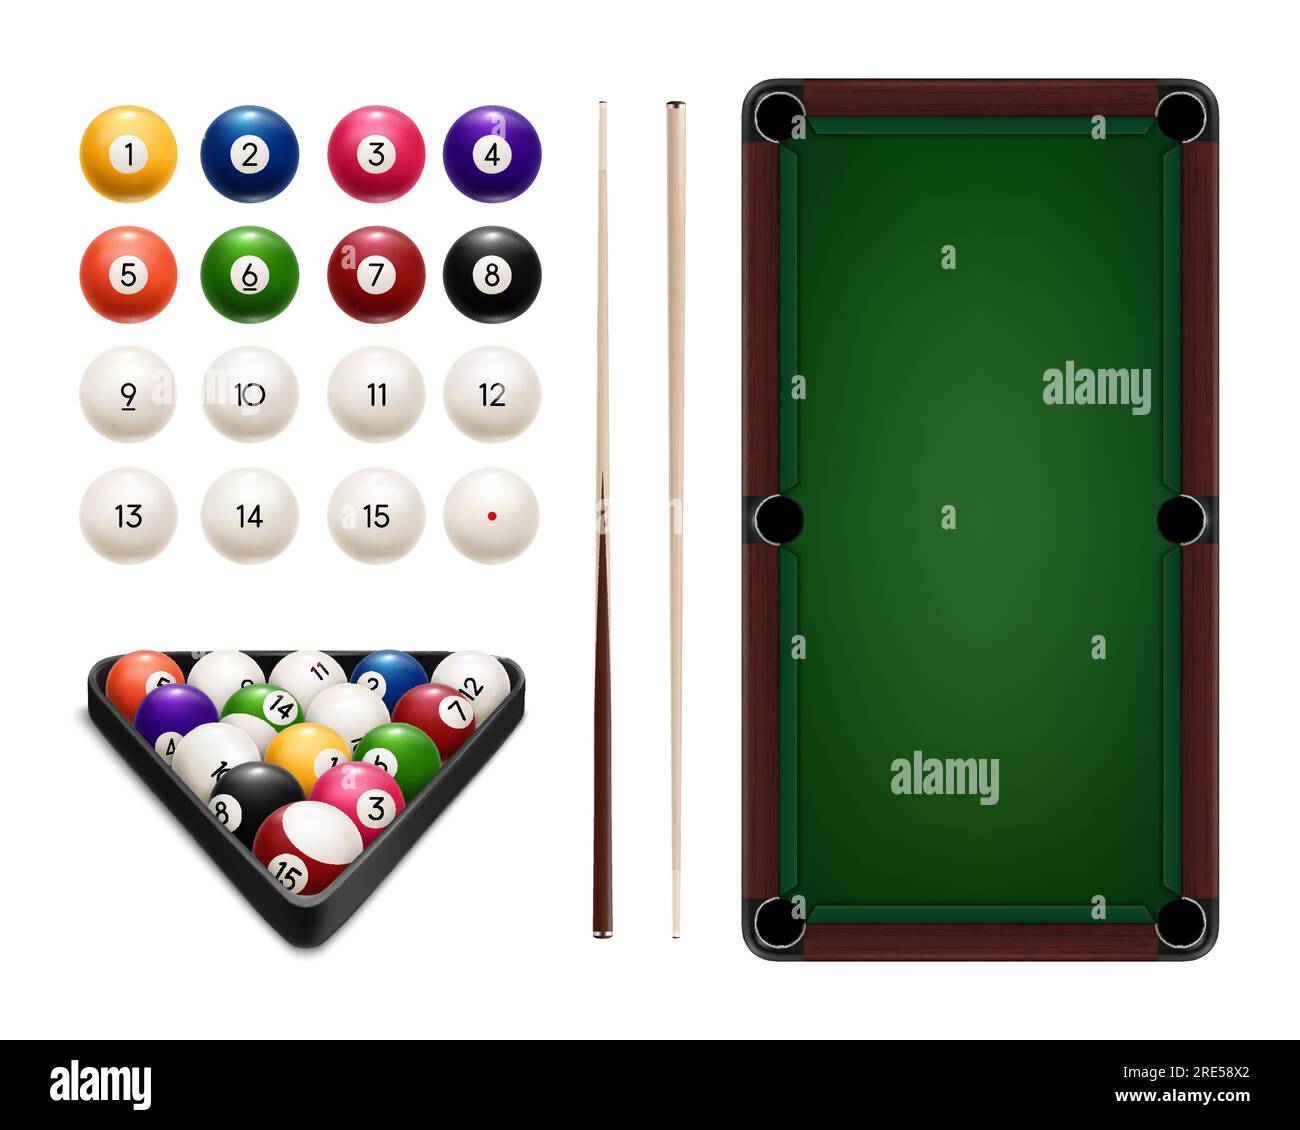 Billiard sport game balls, table, cues and rack realistic vector design of pool and snooker equipment. Pyramid of colorful balls, wooden cue sticks and triangle frame, green table with pockets Stock Vector